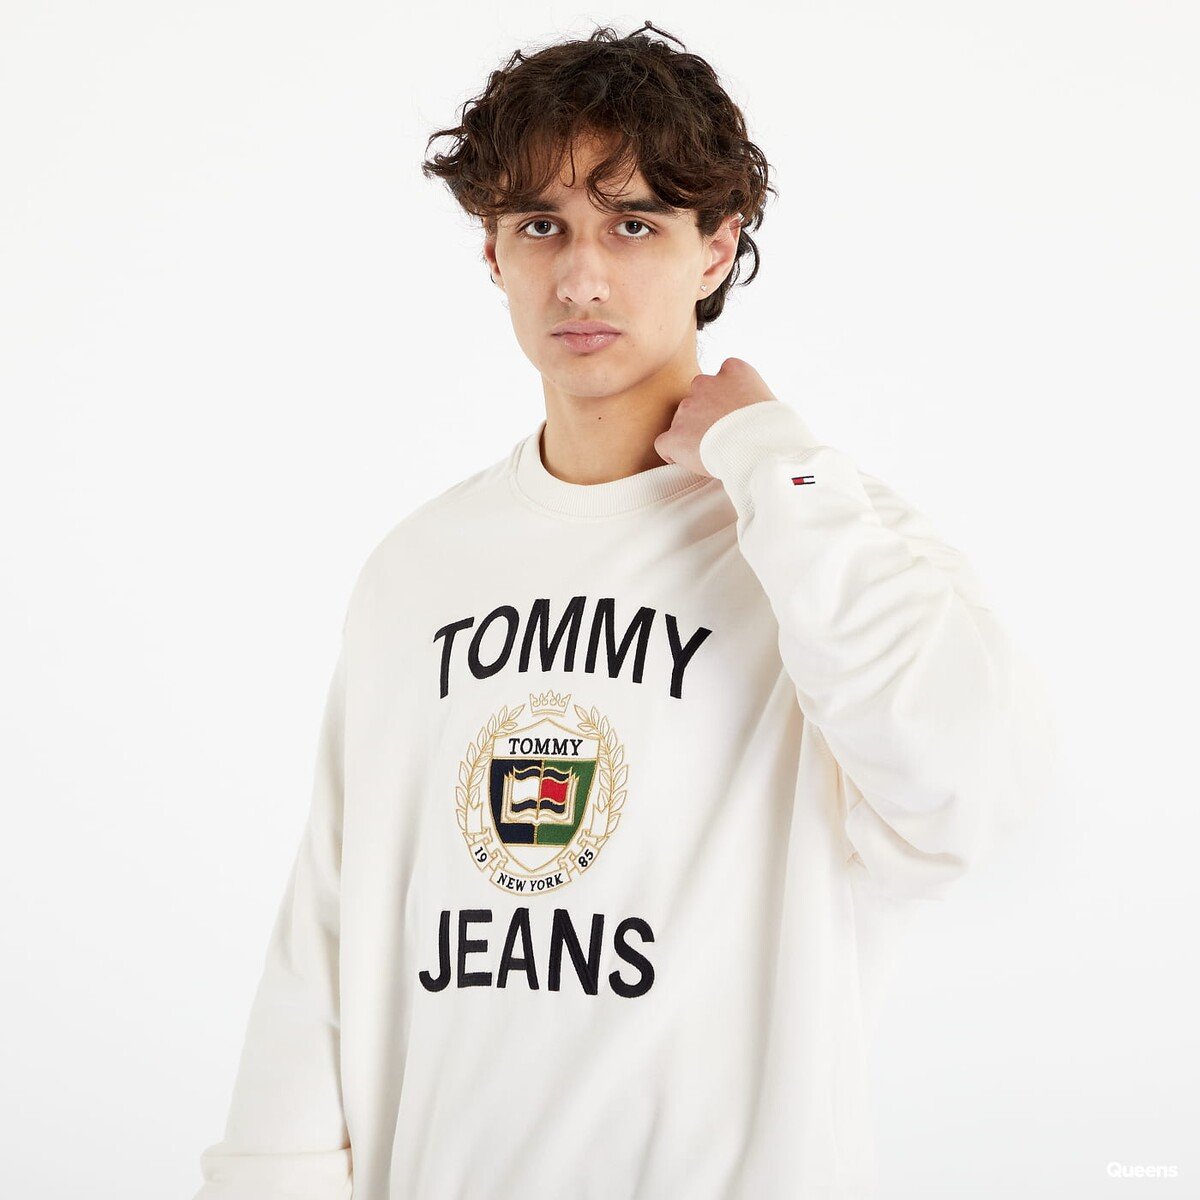 TOMMY Jeans